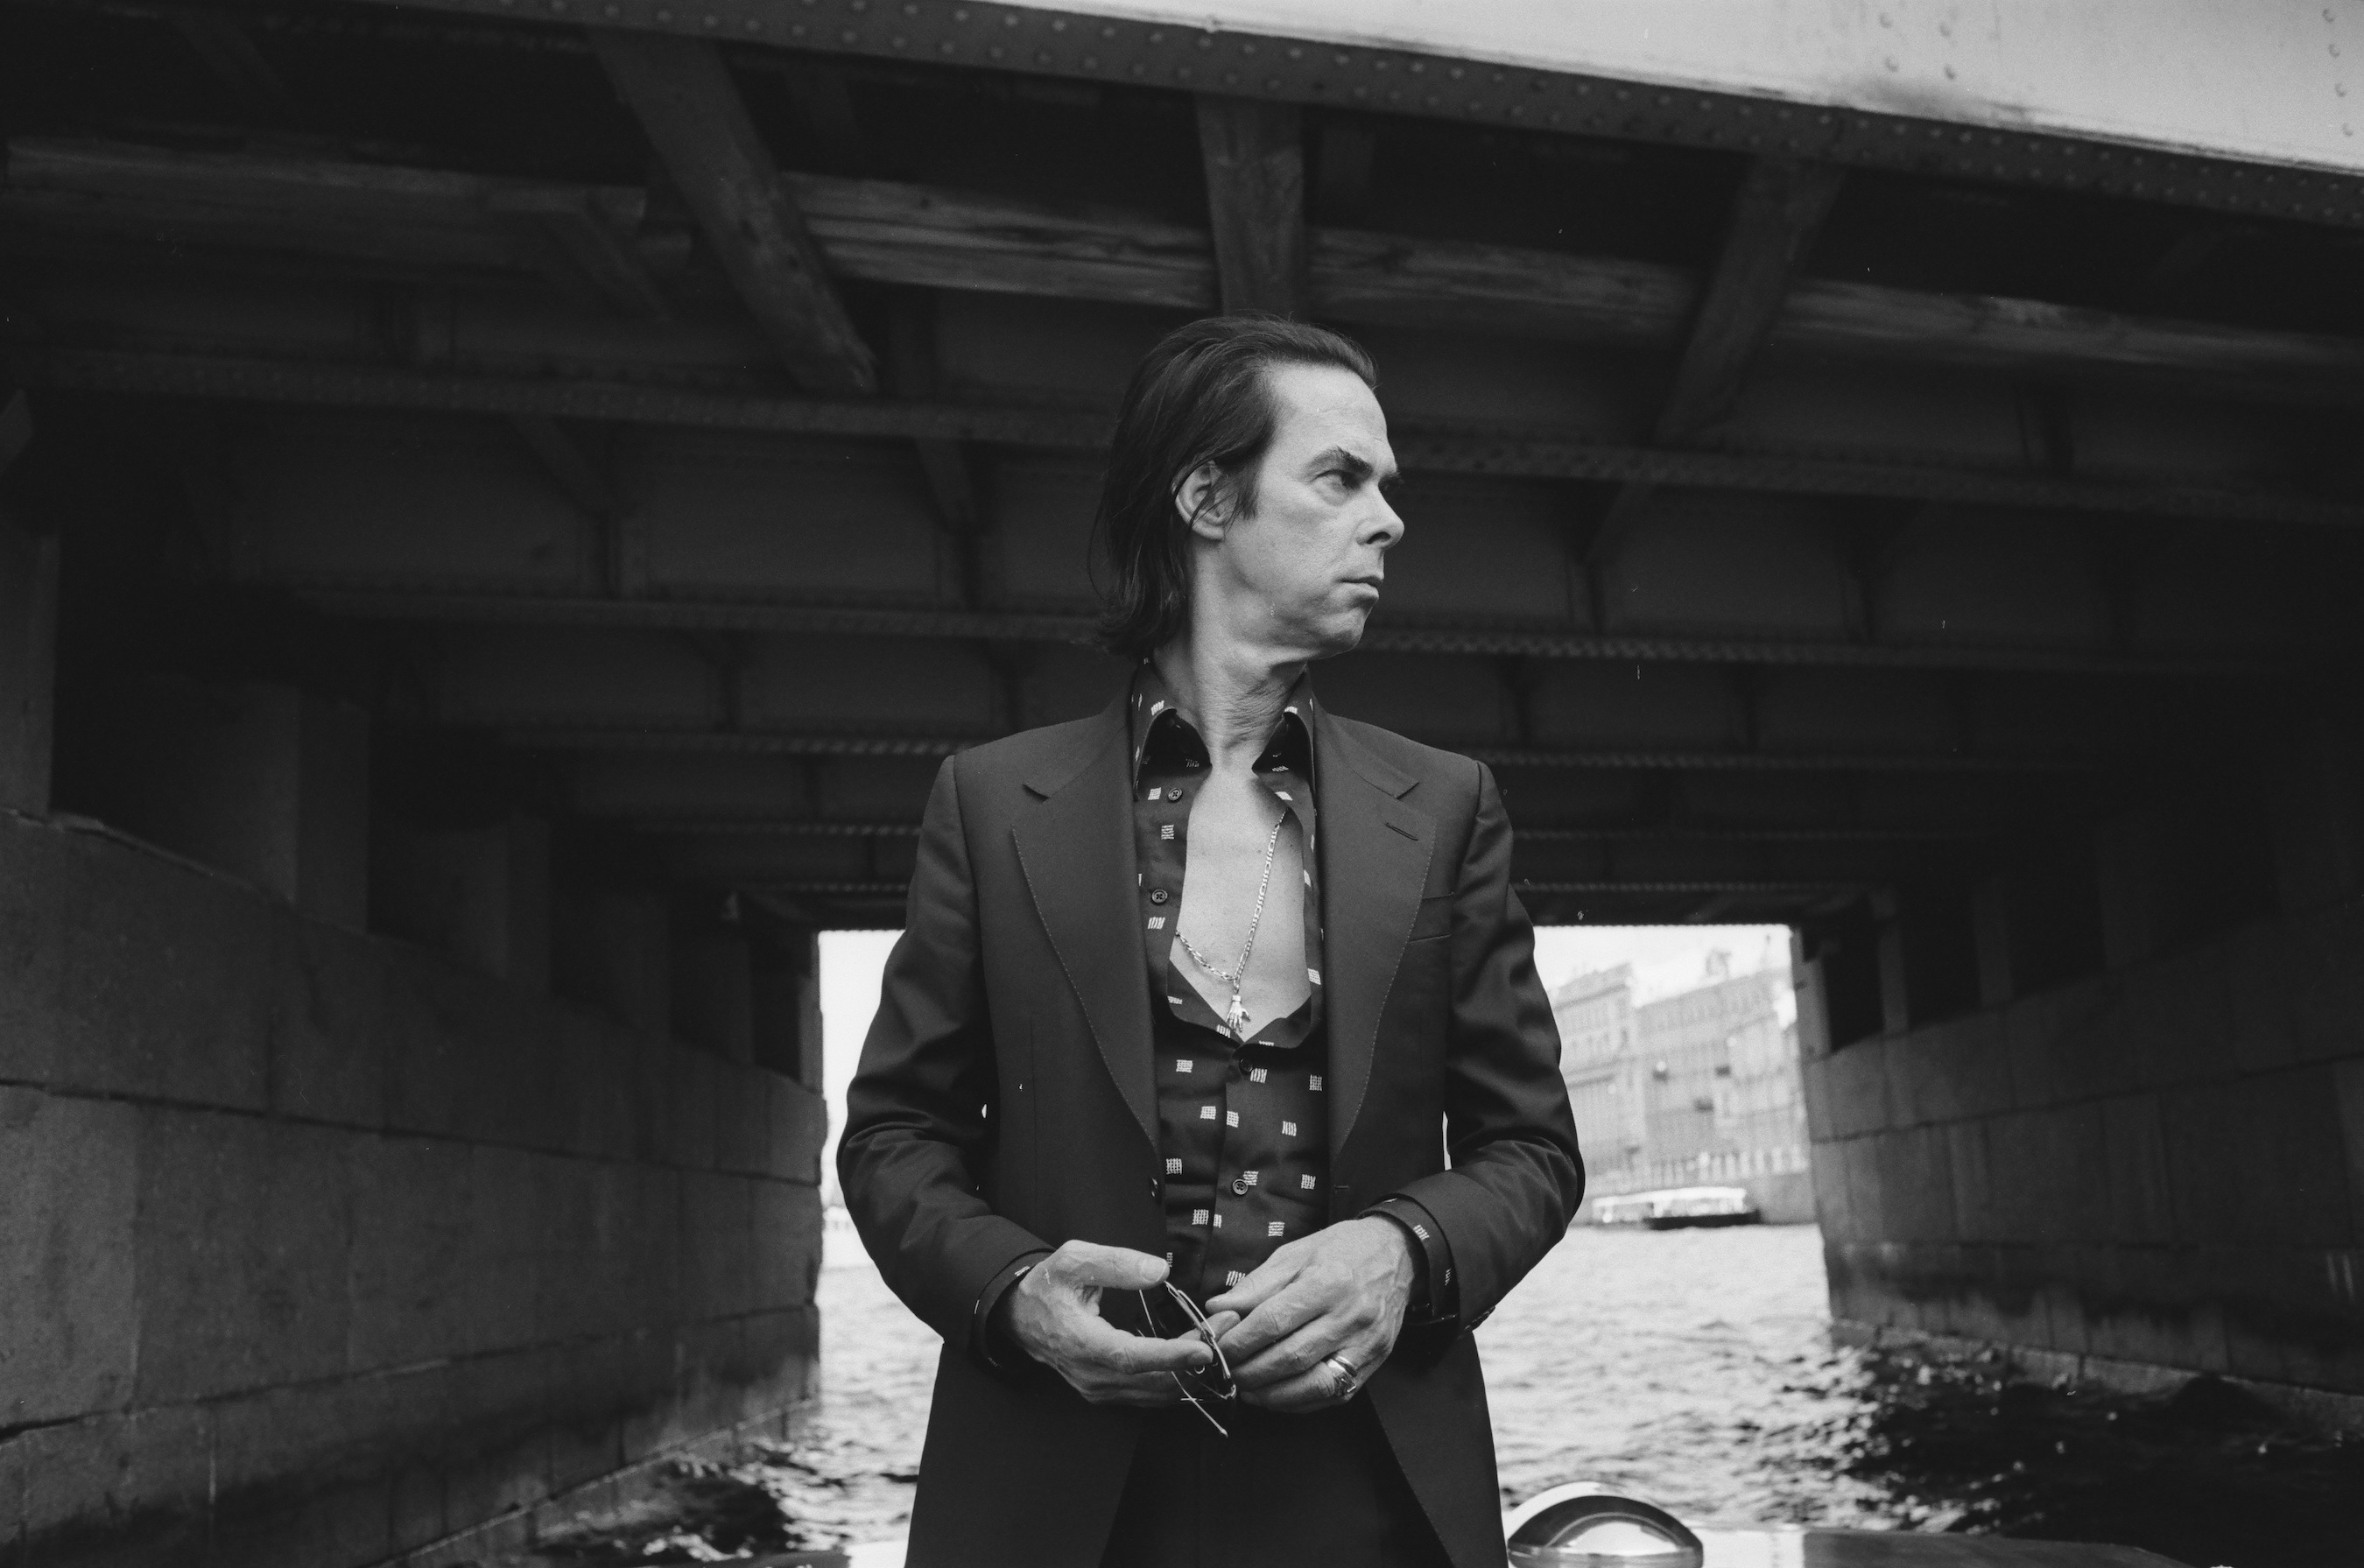 Nick Cave Is Heading Back Home To Australia For An Intimate Q&A Speaking Tour